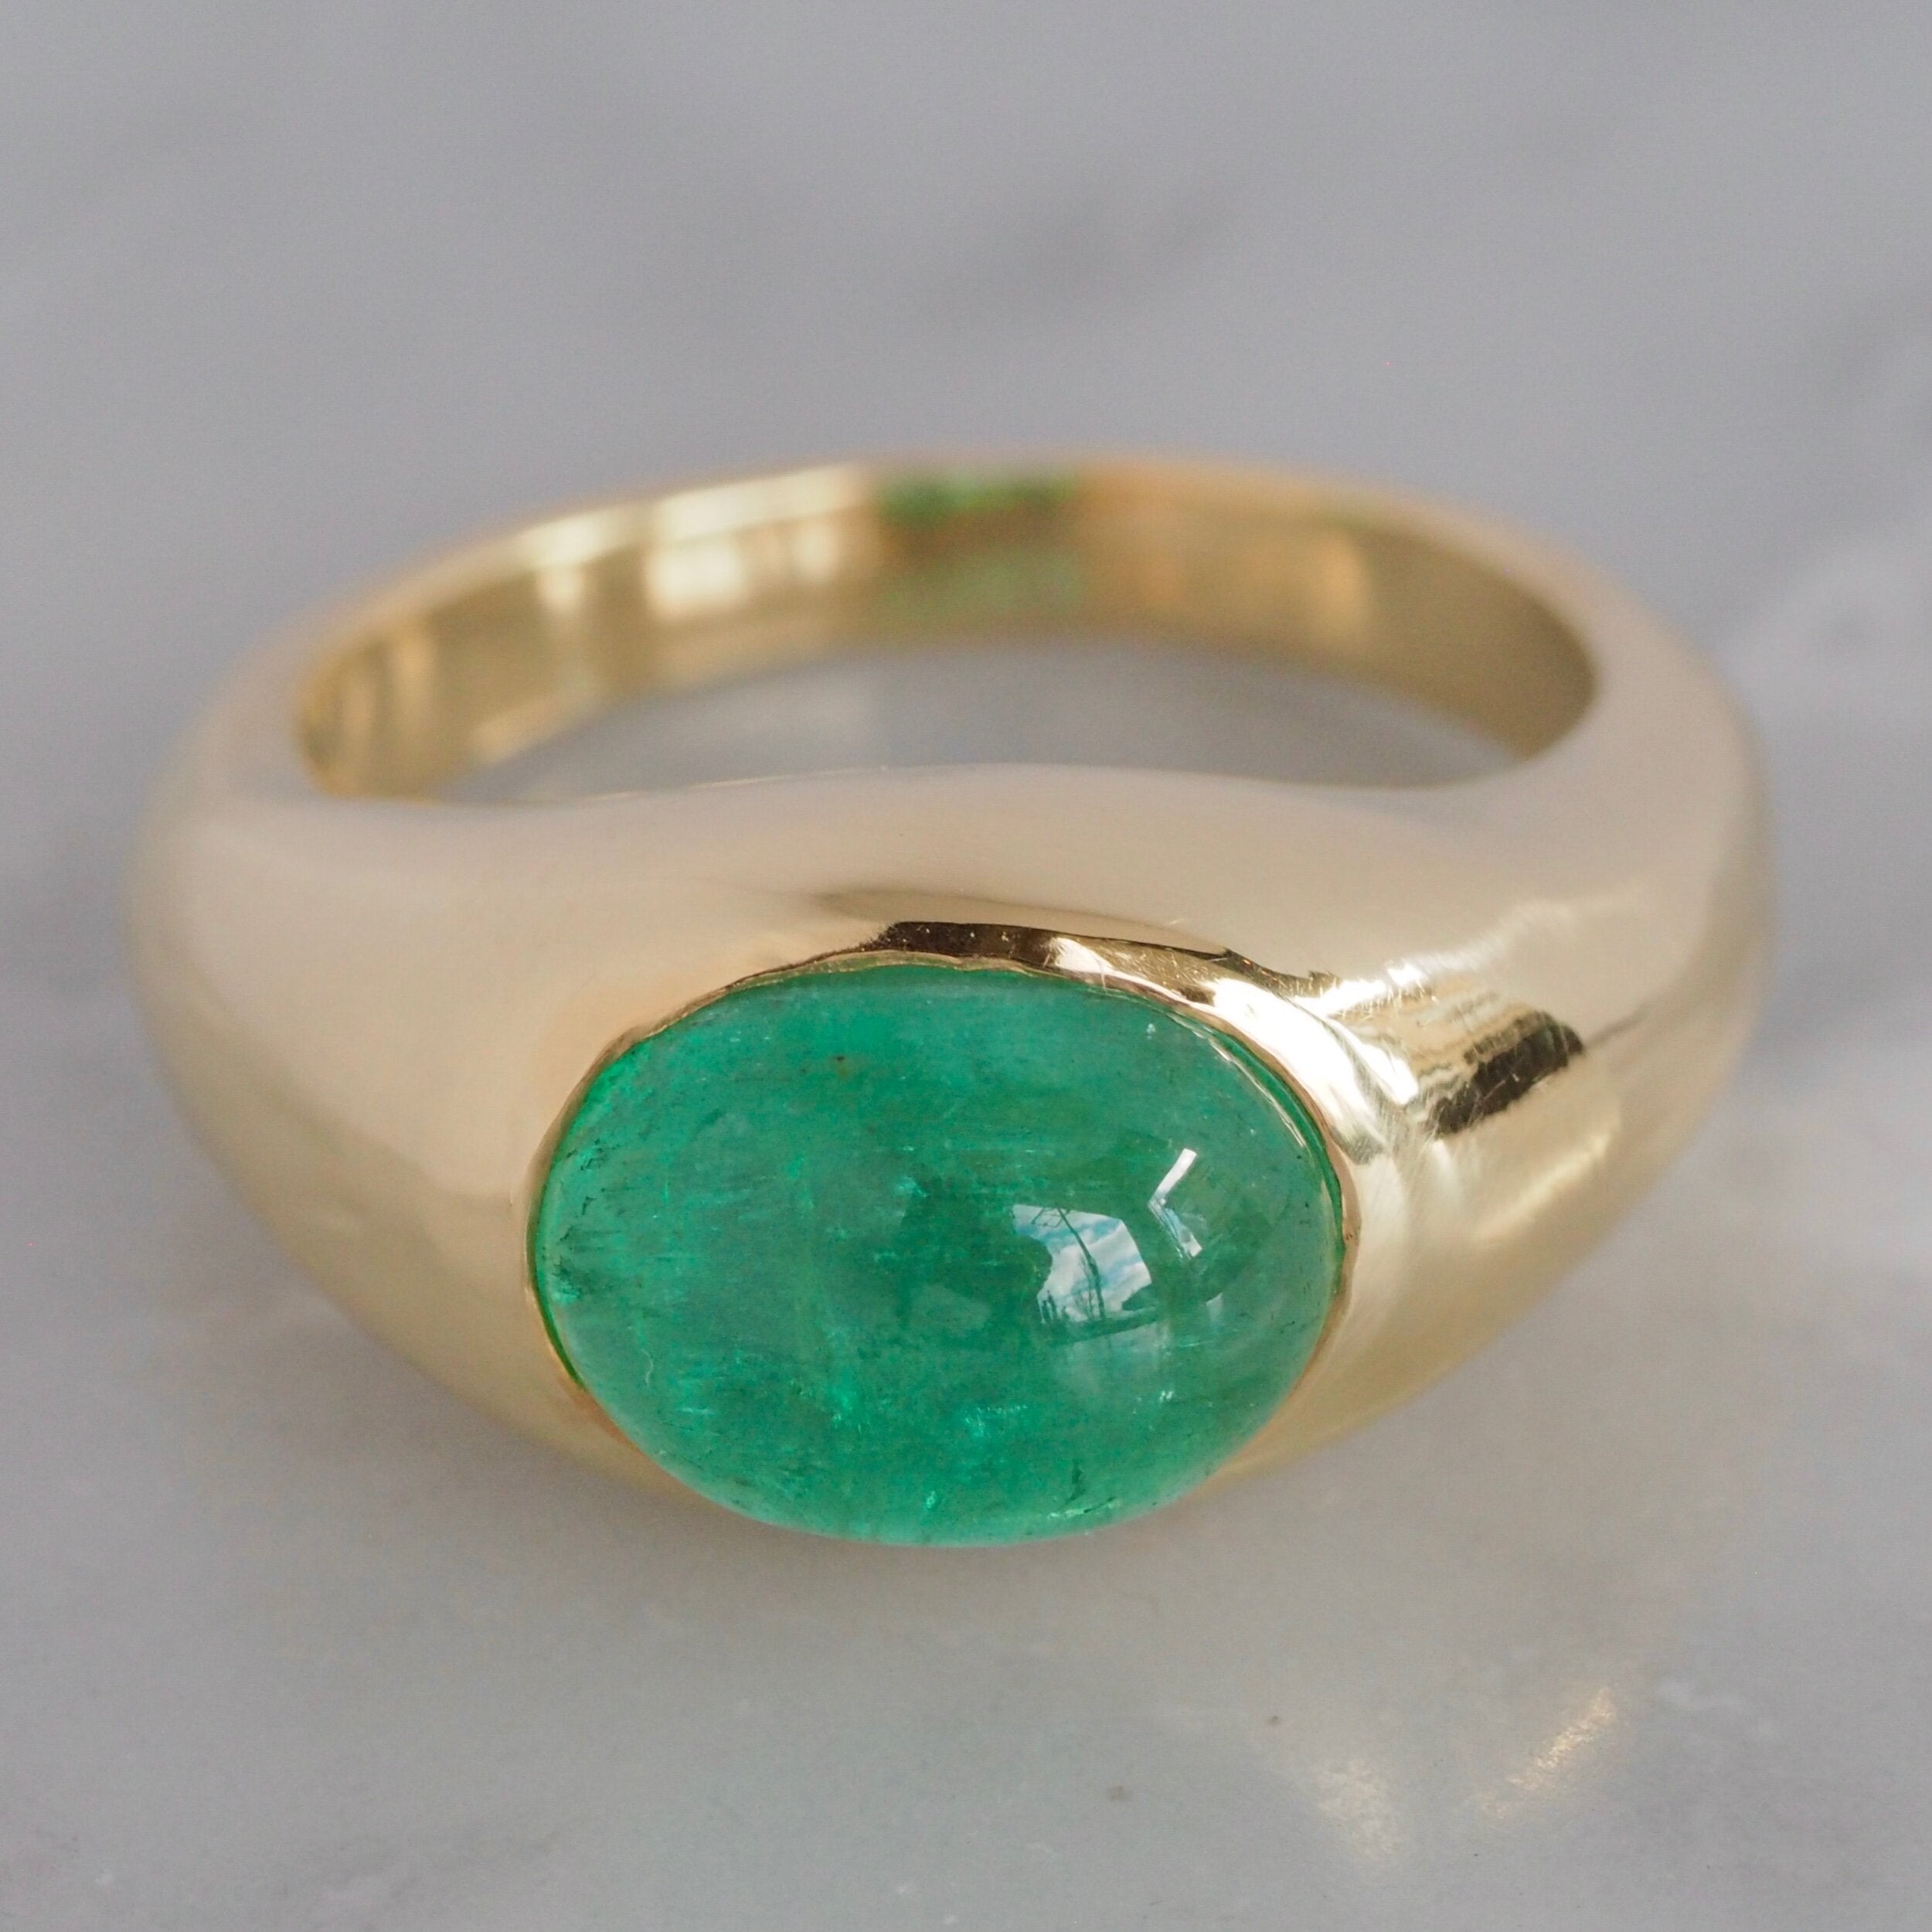 Vintage 1960's French 18k Gold Emerald Ring